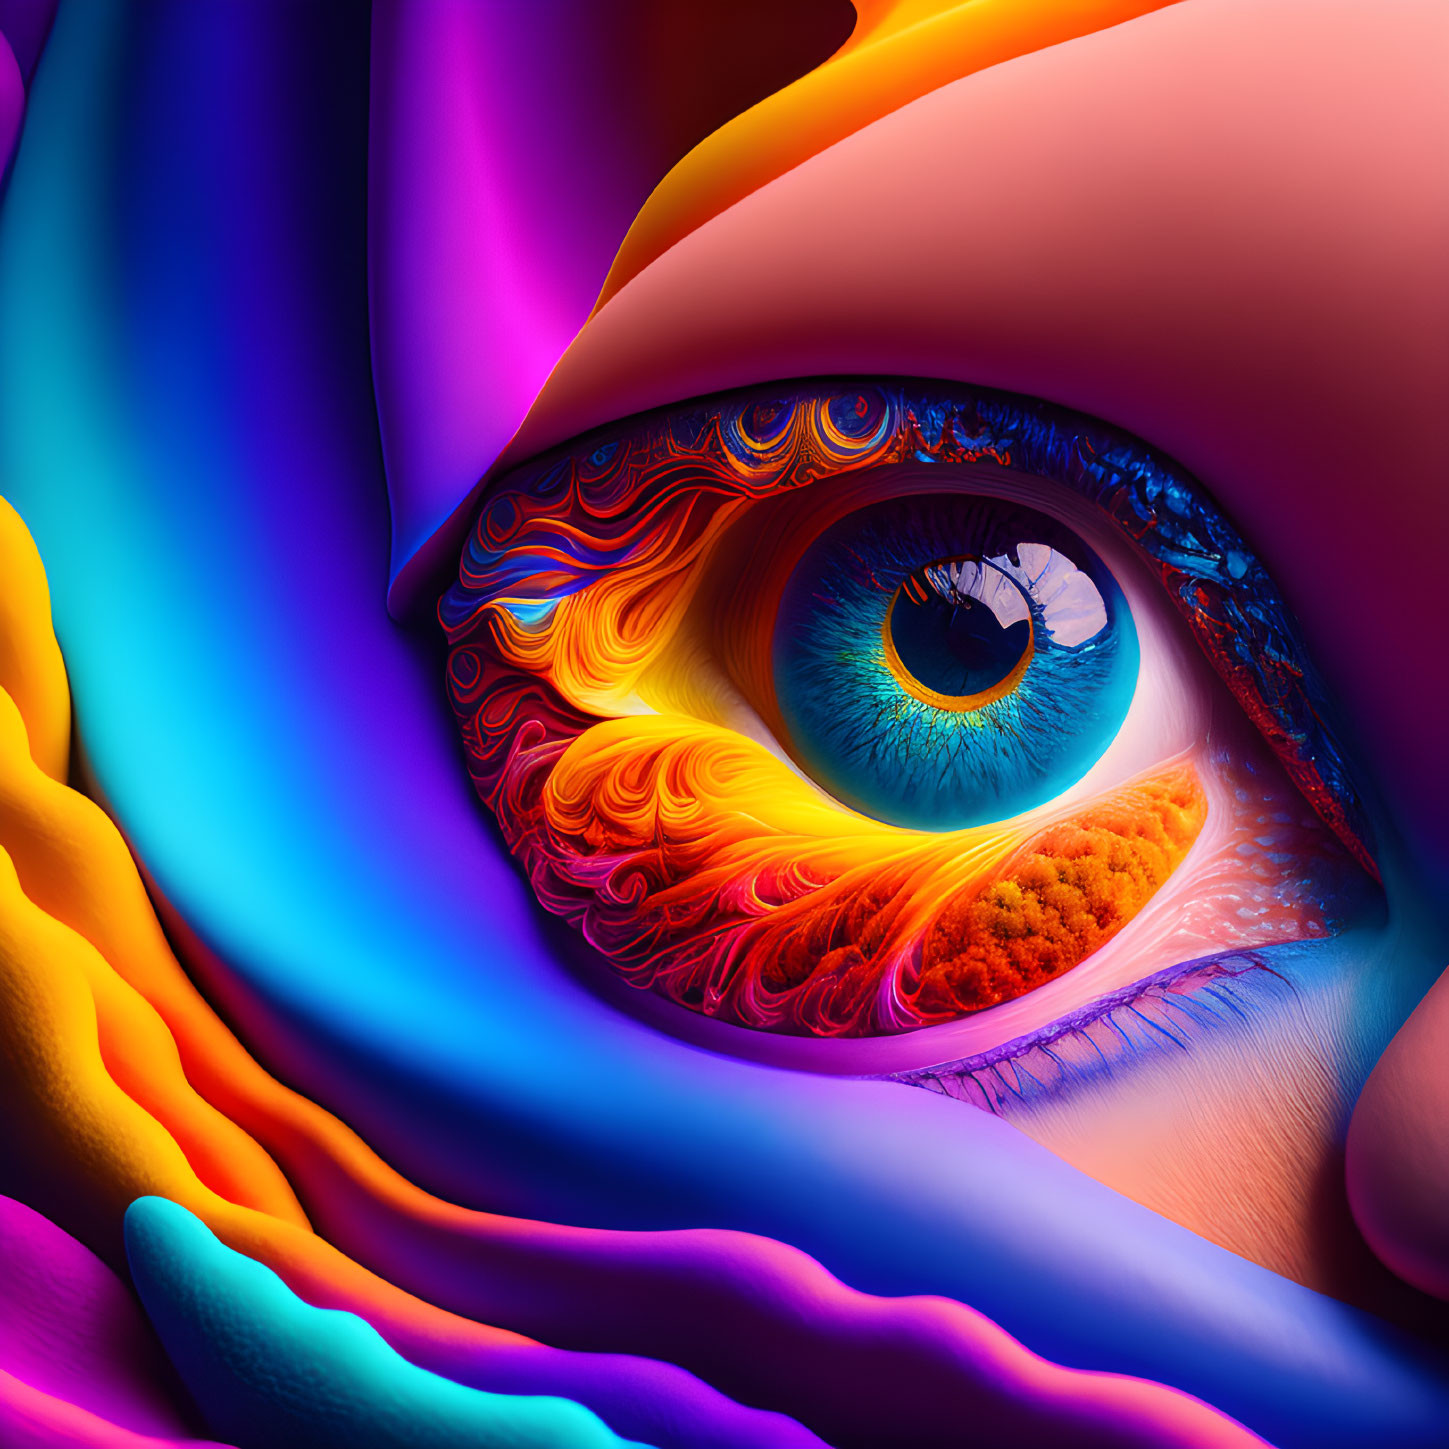 Colorful Abstract Eye Artwork with Flowing Shapes and Textures